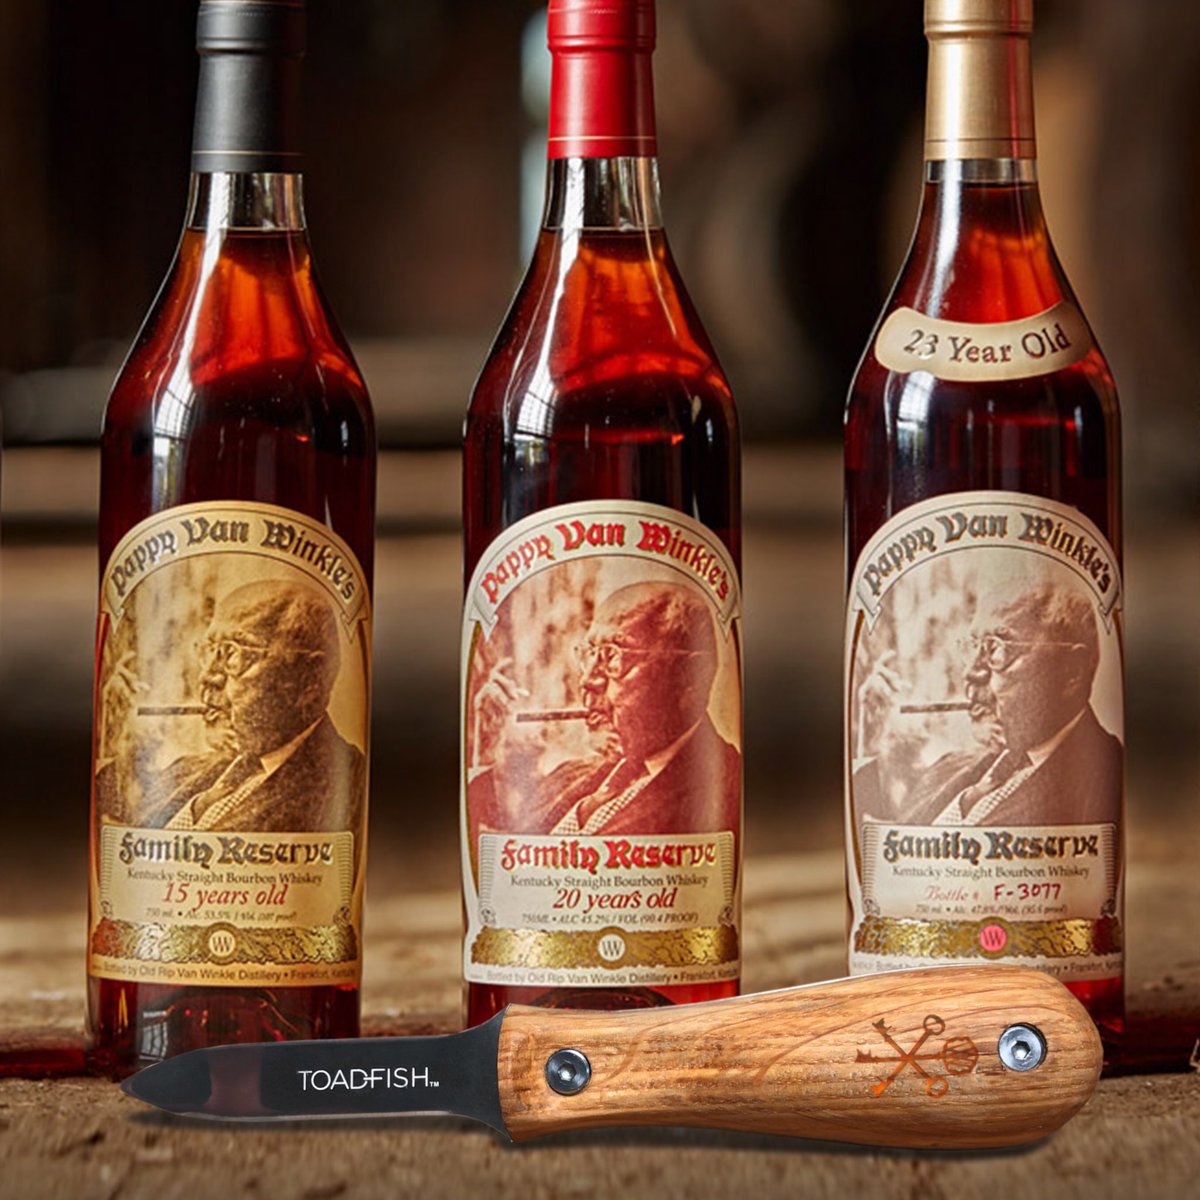 Today on @thebourbondaily, we talk to Casey Davidson, CEO of @ToadfishOutfit oyster knife they made out of used Pappy Van Winkle barrels via about a unique partnership with @pappyandco Listen here: goo.gl/i5AFsS Buy a knife here: goo.gl/vrdqfx